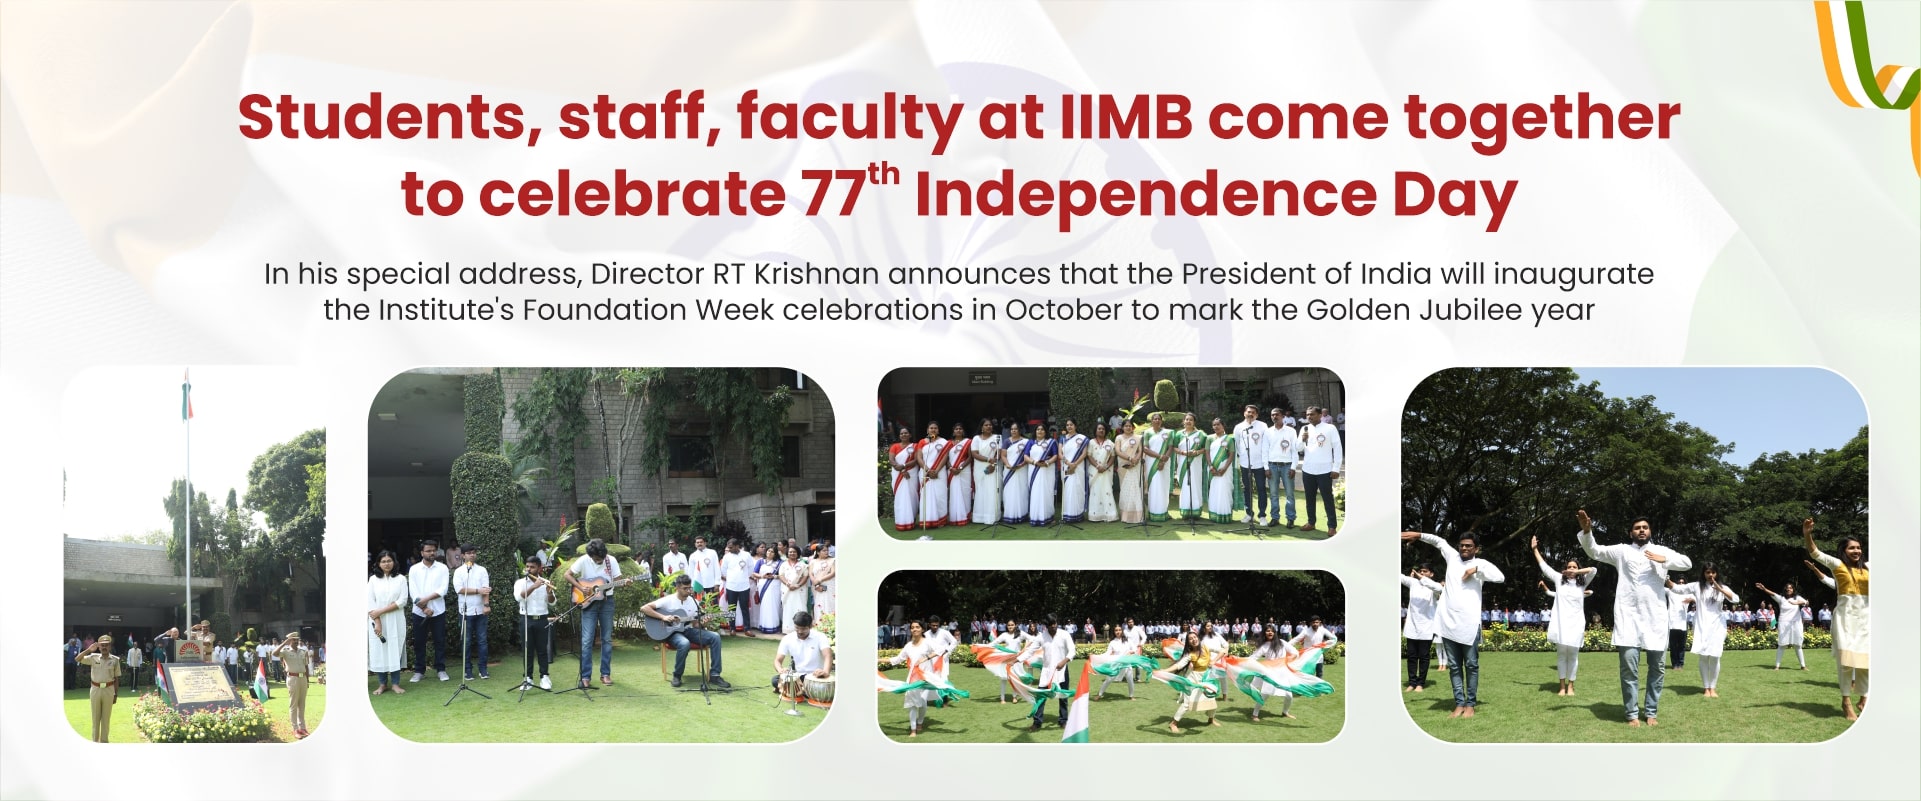 Students, staff, faculty at IIMB come together to celebrate 77th Independence Day